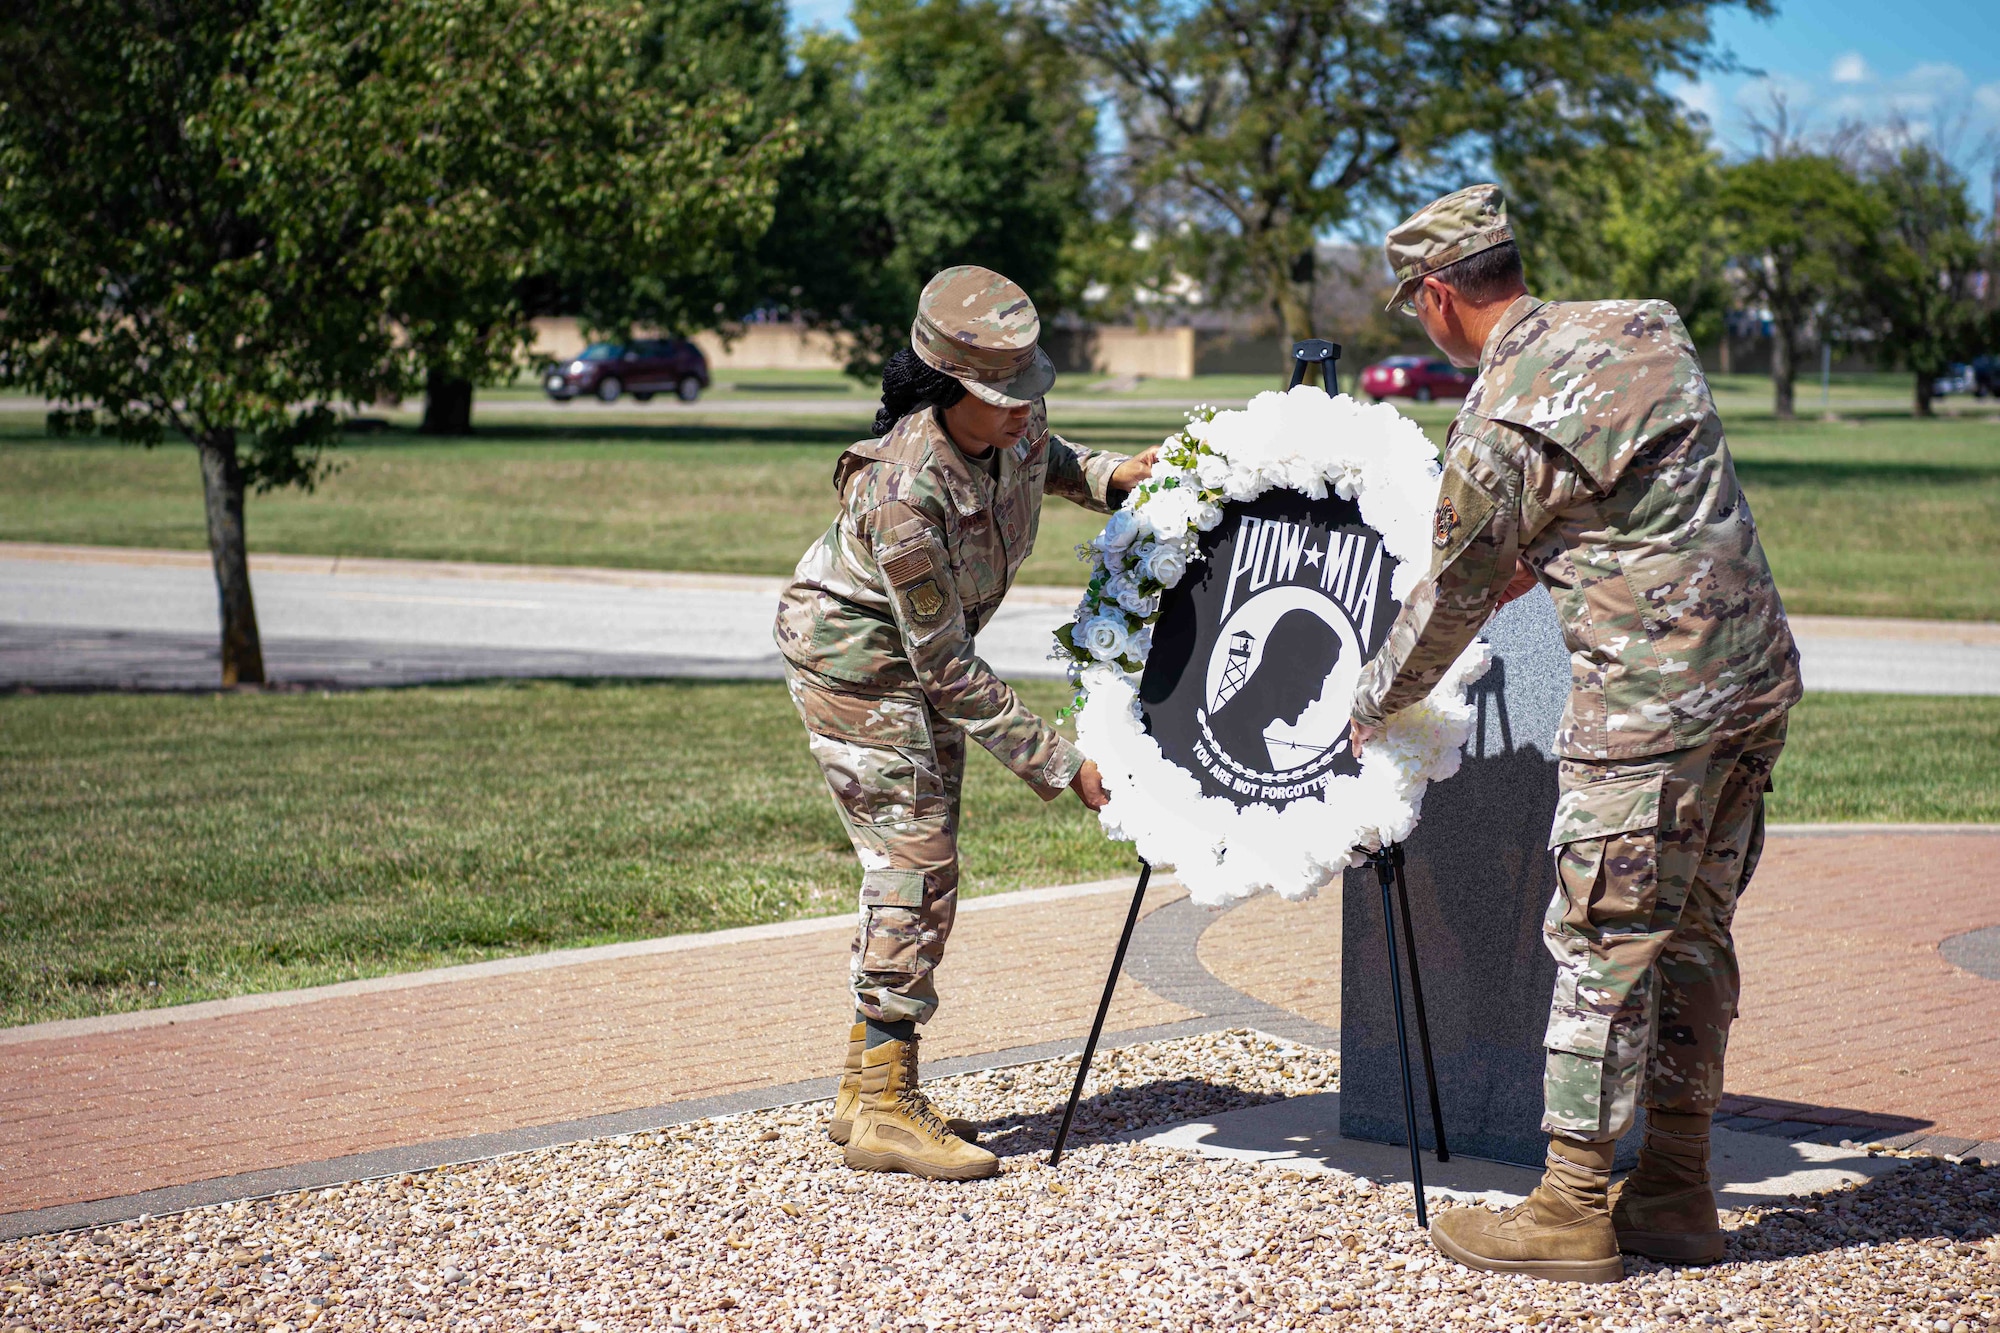 Col. Nate Vogel, 22nd Air Refueling Wing commander, and Chief Master Sgt. Melissa Royster, 22nd ARW command chief, lay a Prisoner of War/Missing in Action wreath during the POW/MIA wreath laying ceremony Sept. 16, 2021, at McConnell Air Force Base, Kansas. McConnell AFB hosts the ceremony to honor the United States’ Prisoners of War and those who are still Missing in Action. (U.S. Air Force photo by Senior Airman Marc A. Garcia)